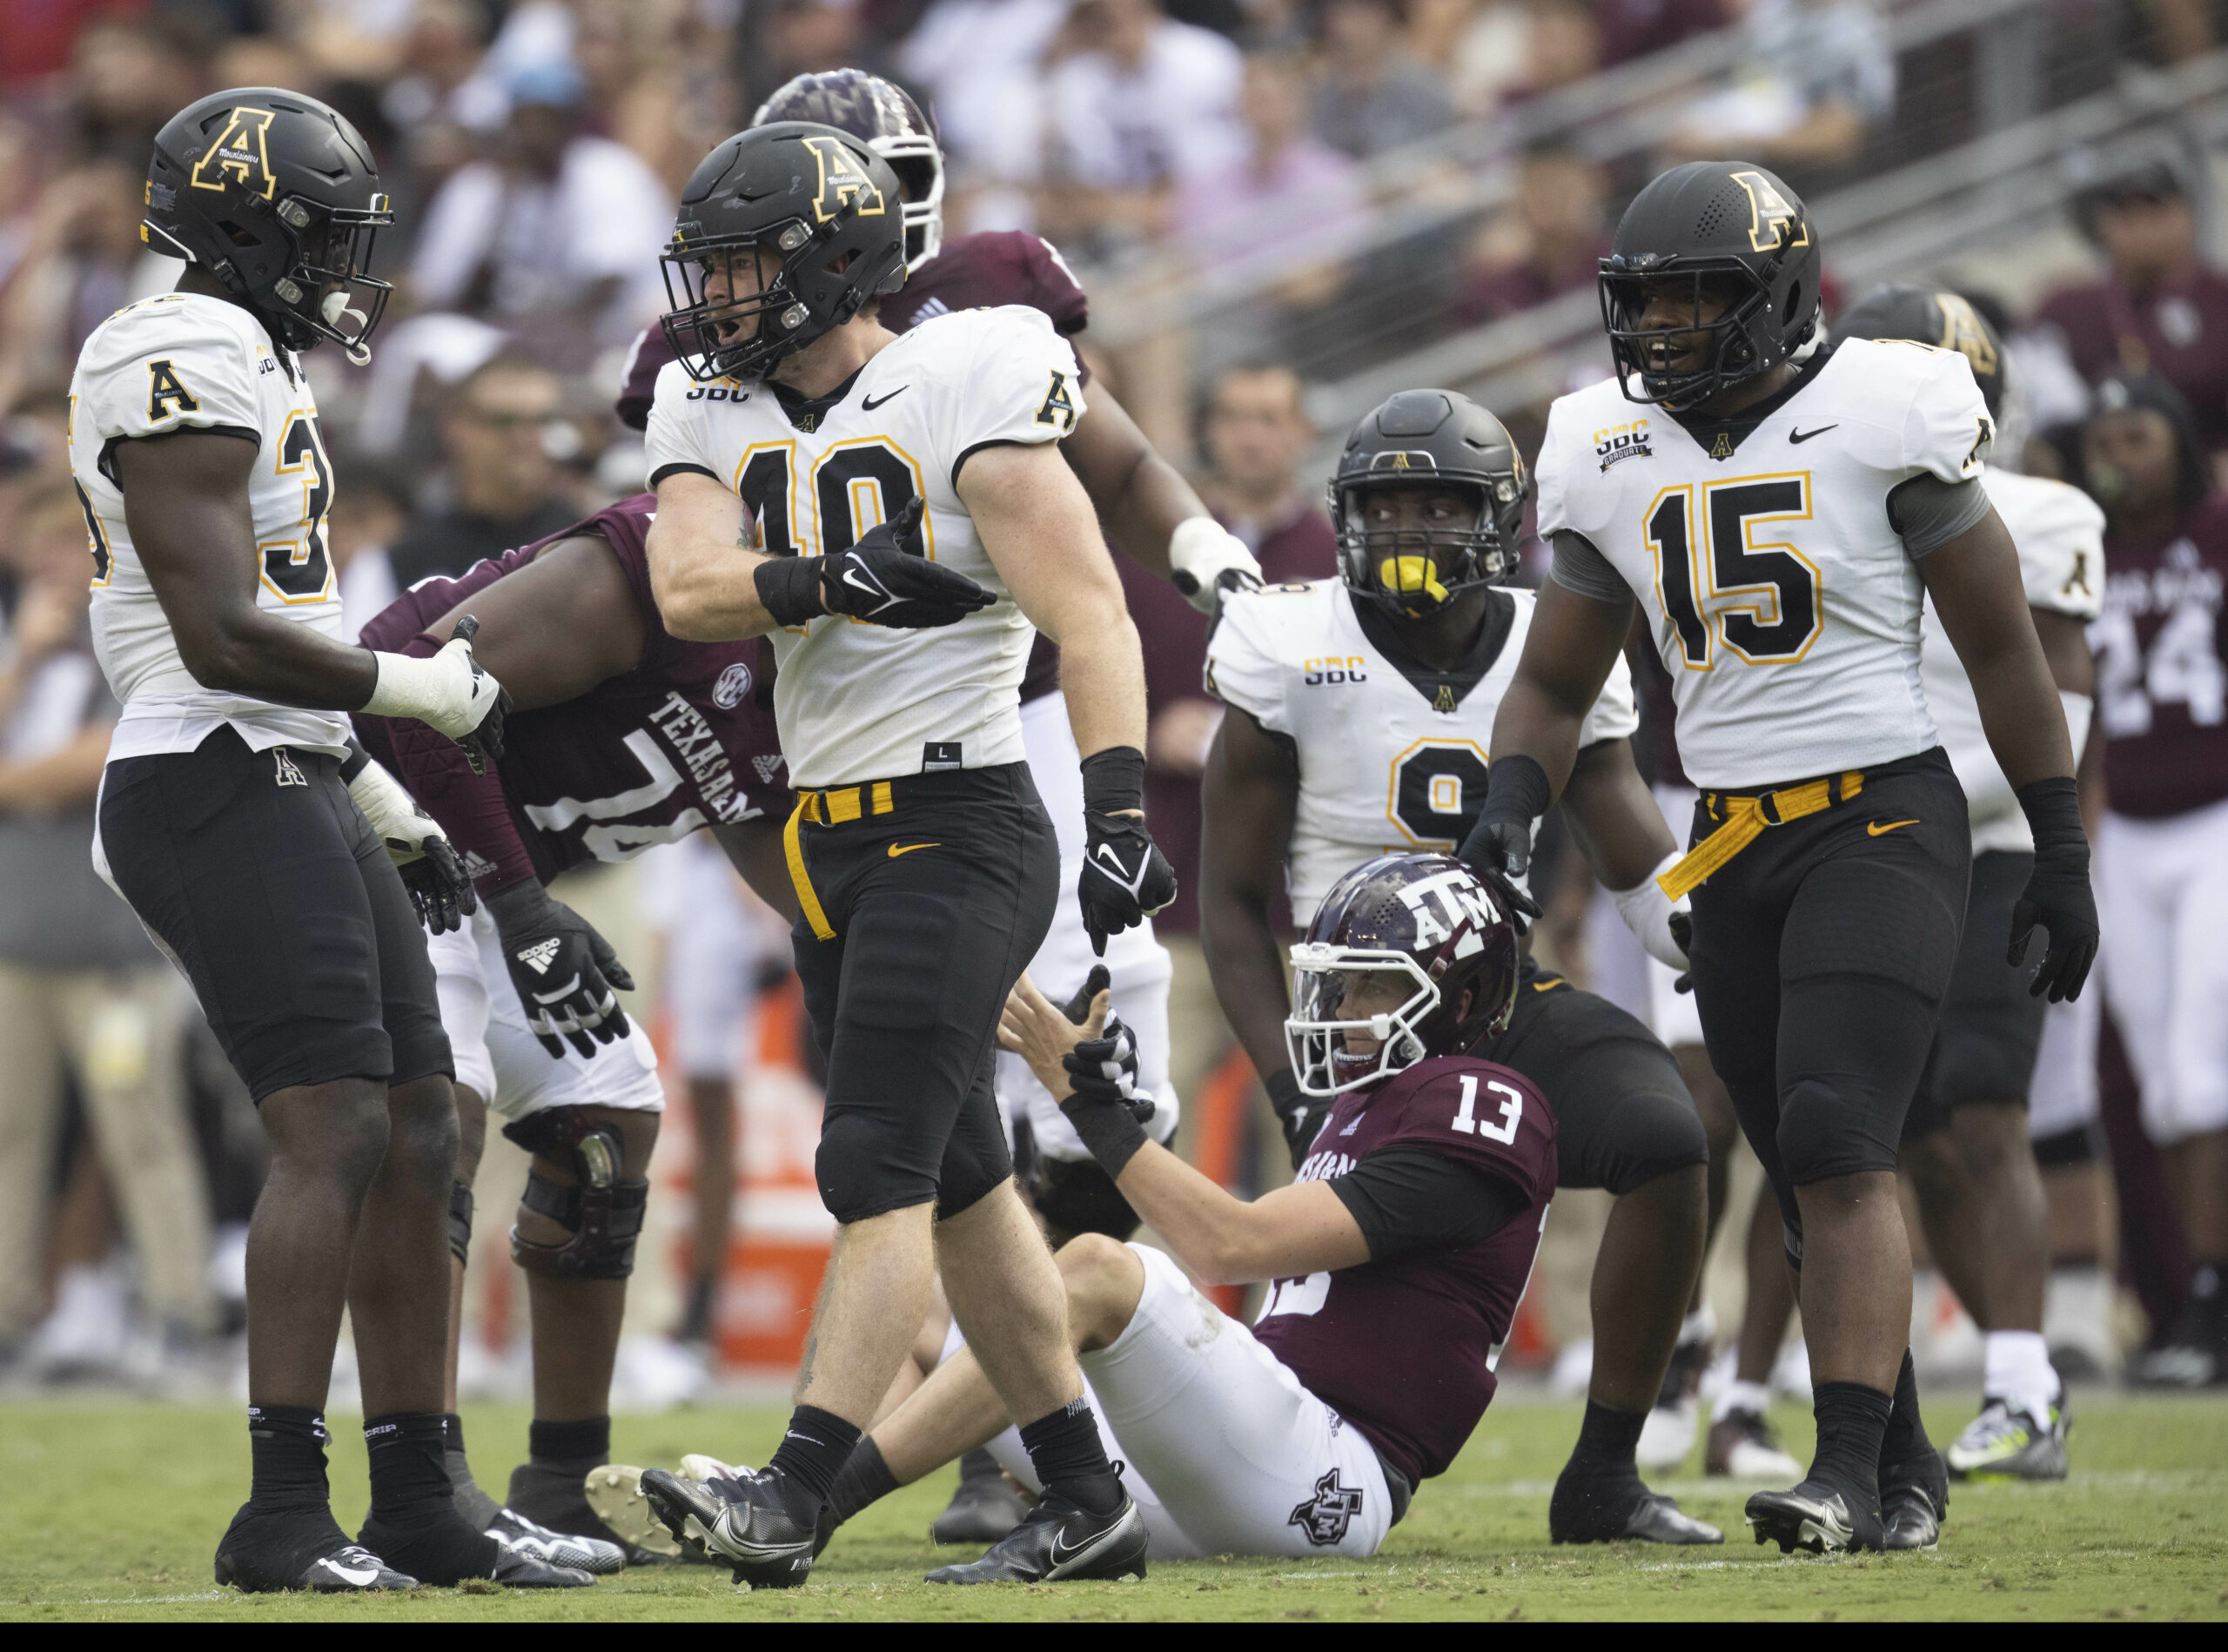 Appalachian State staggers Texas A&M in College Station